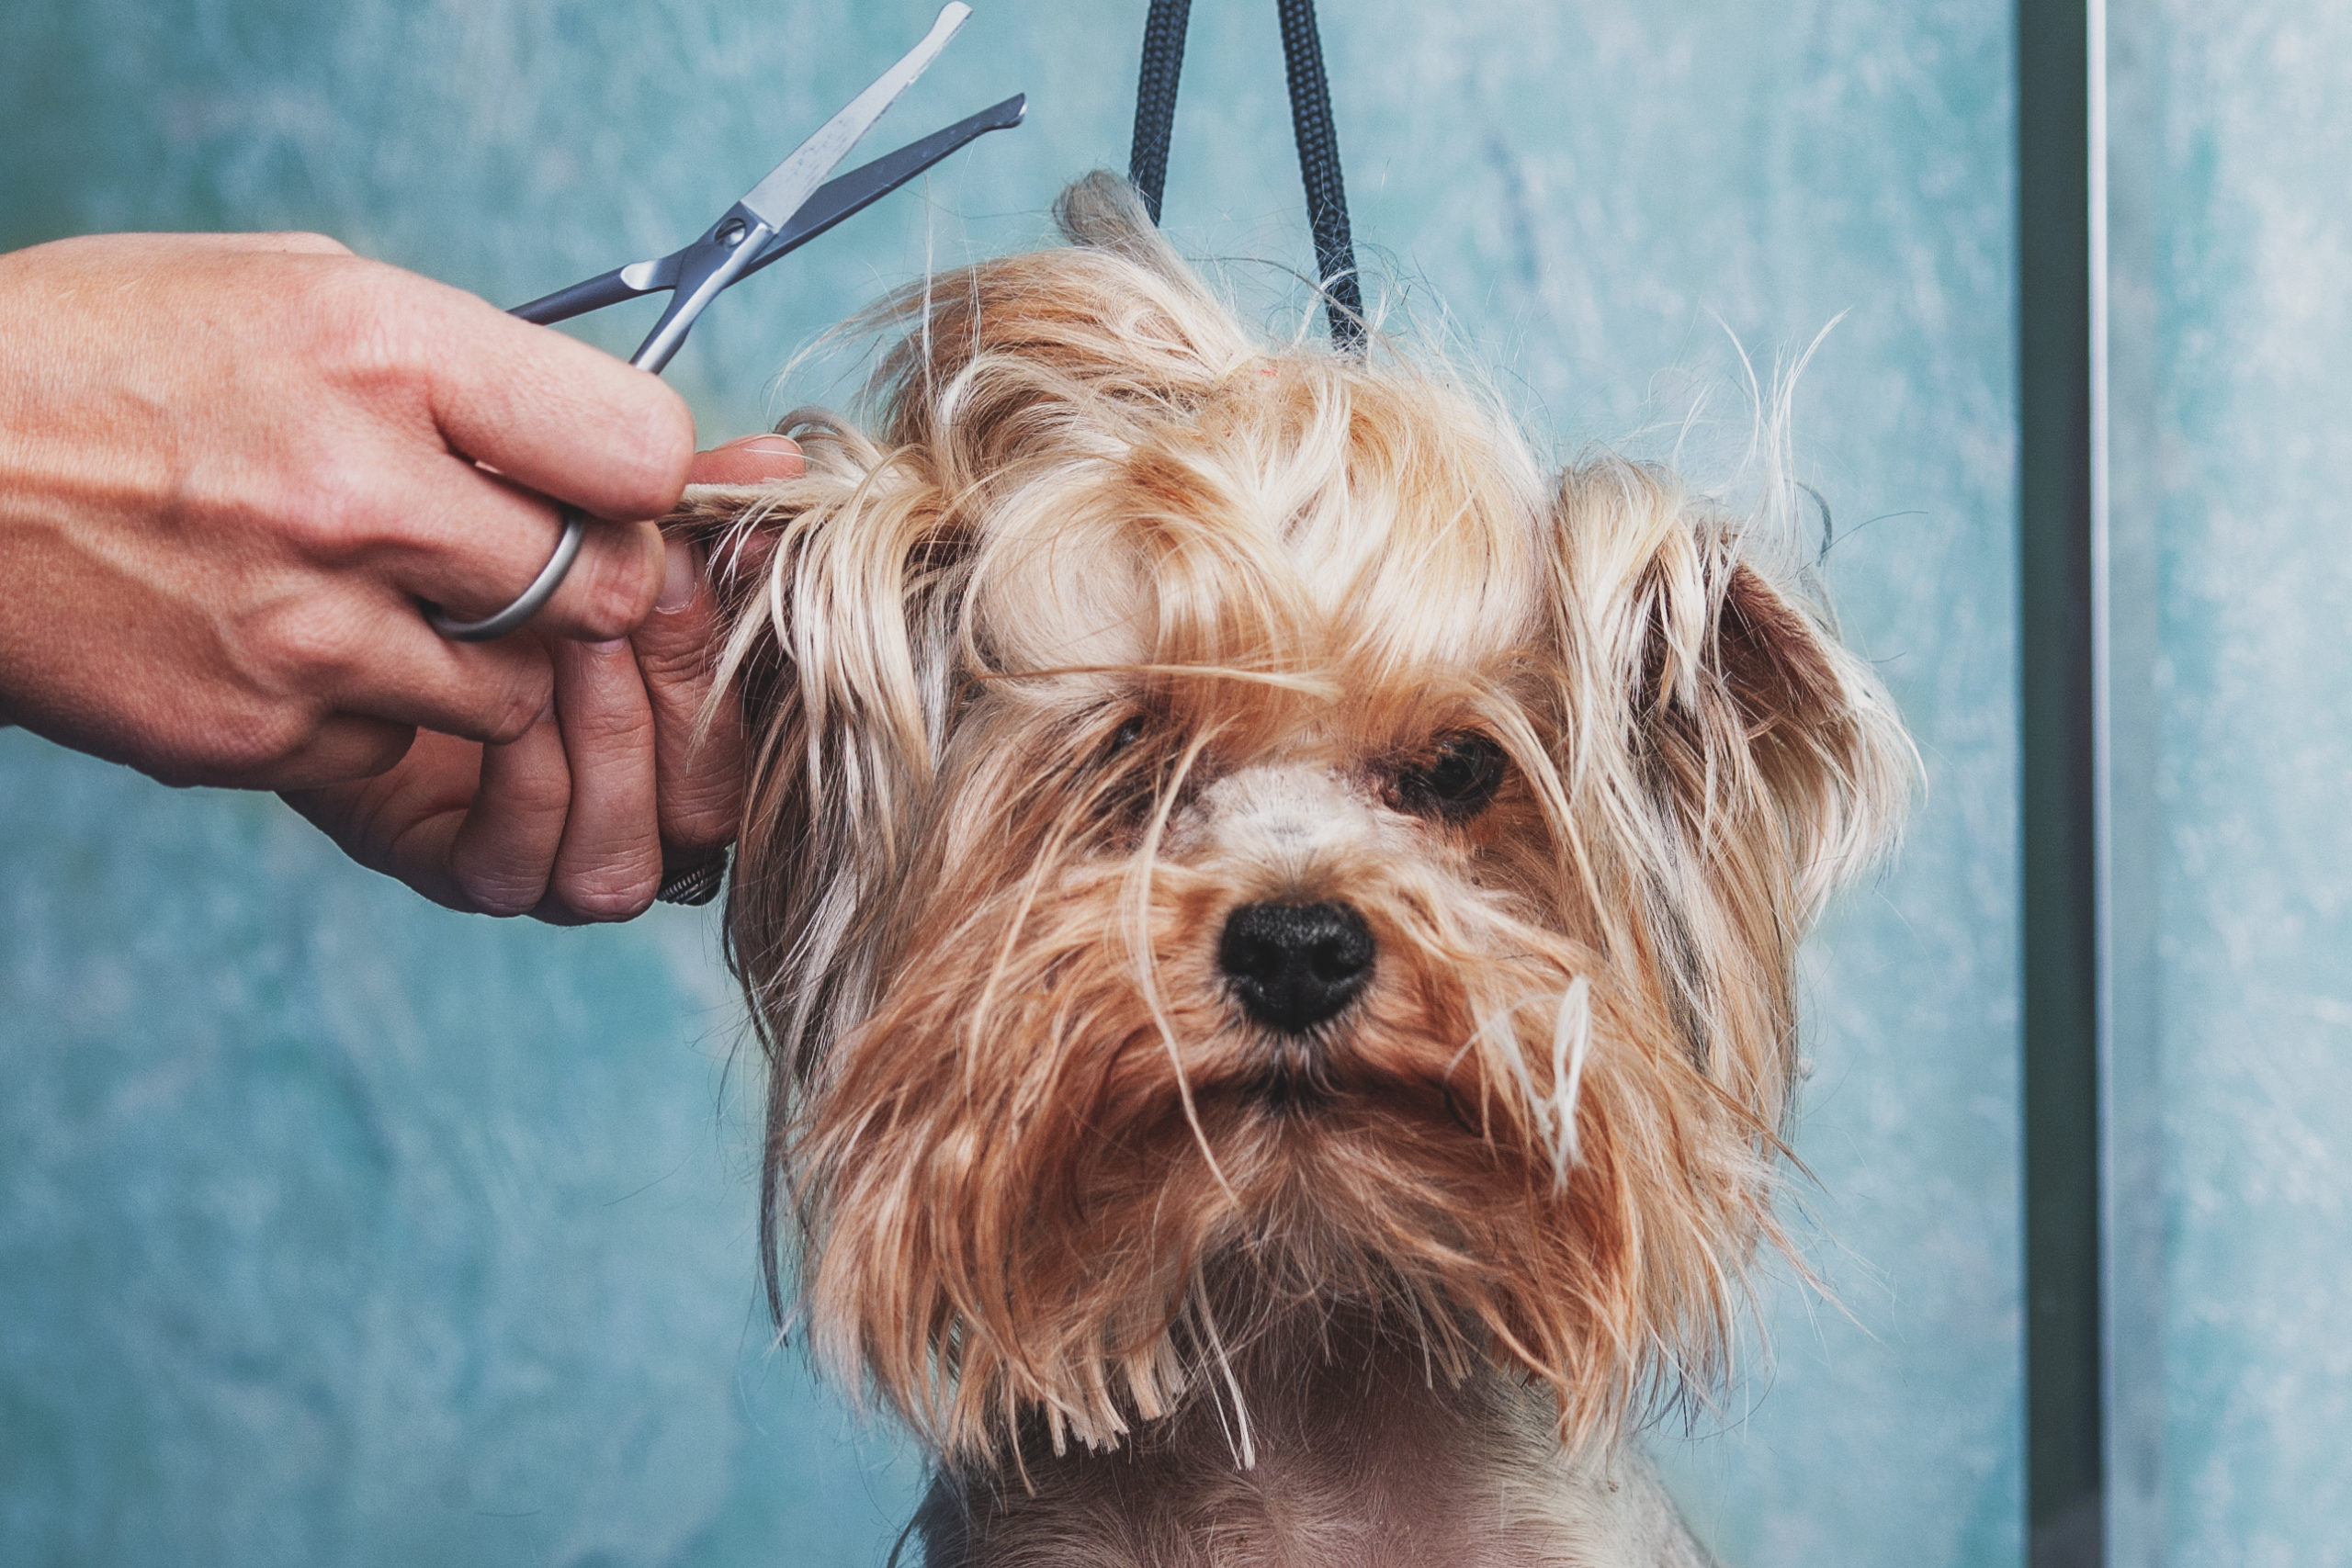 woman hand Grooming Yorkshire terrier dog